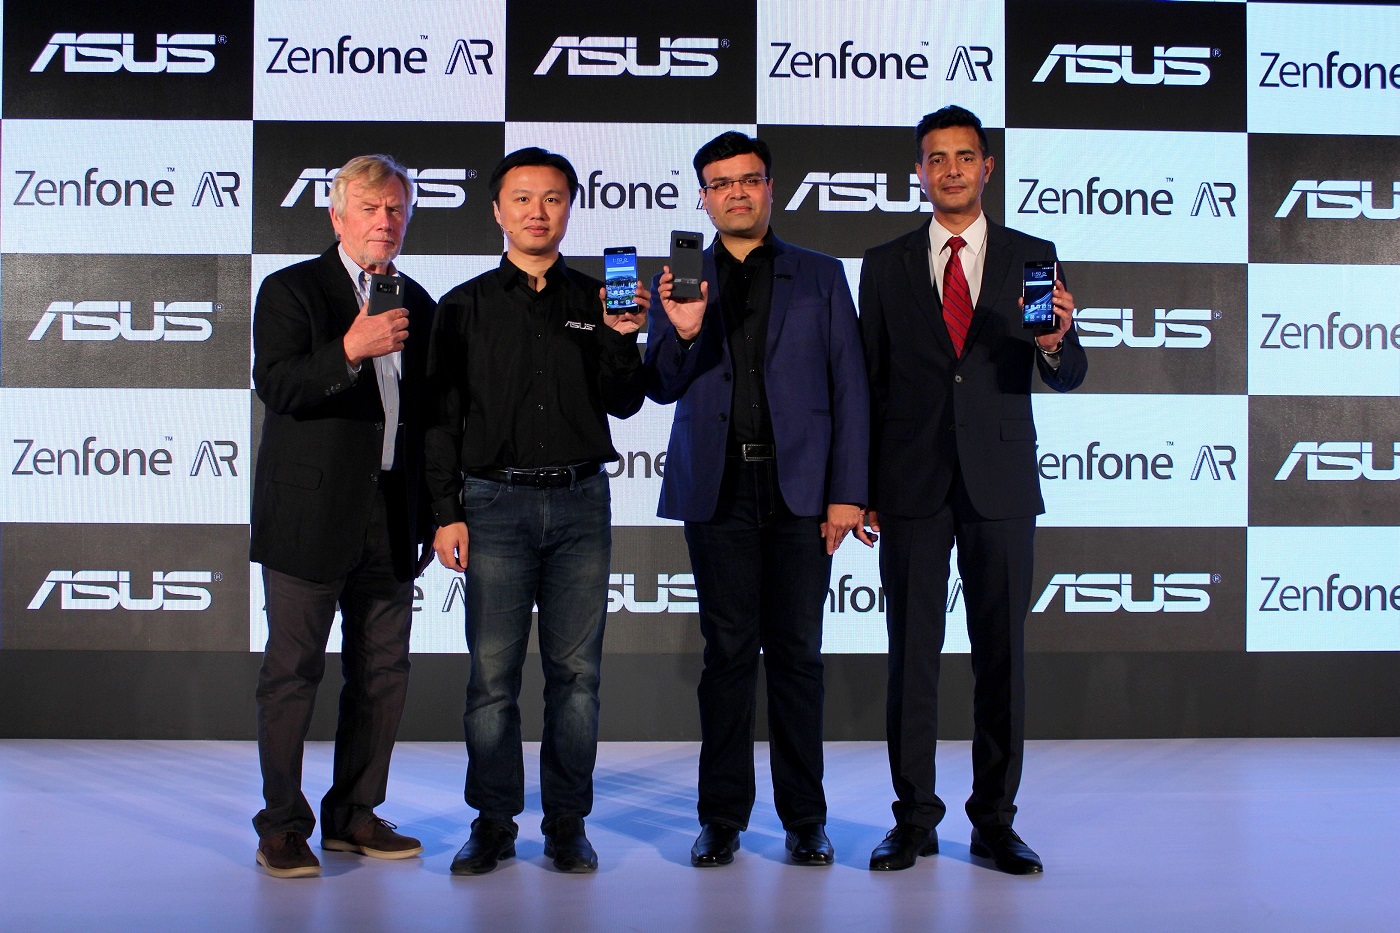 Asus Zenfone AR launched in India as a Flipkart exclusive device 1